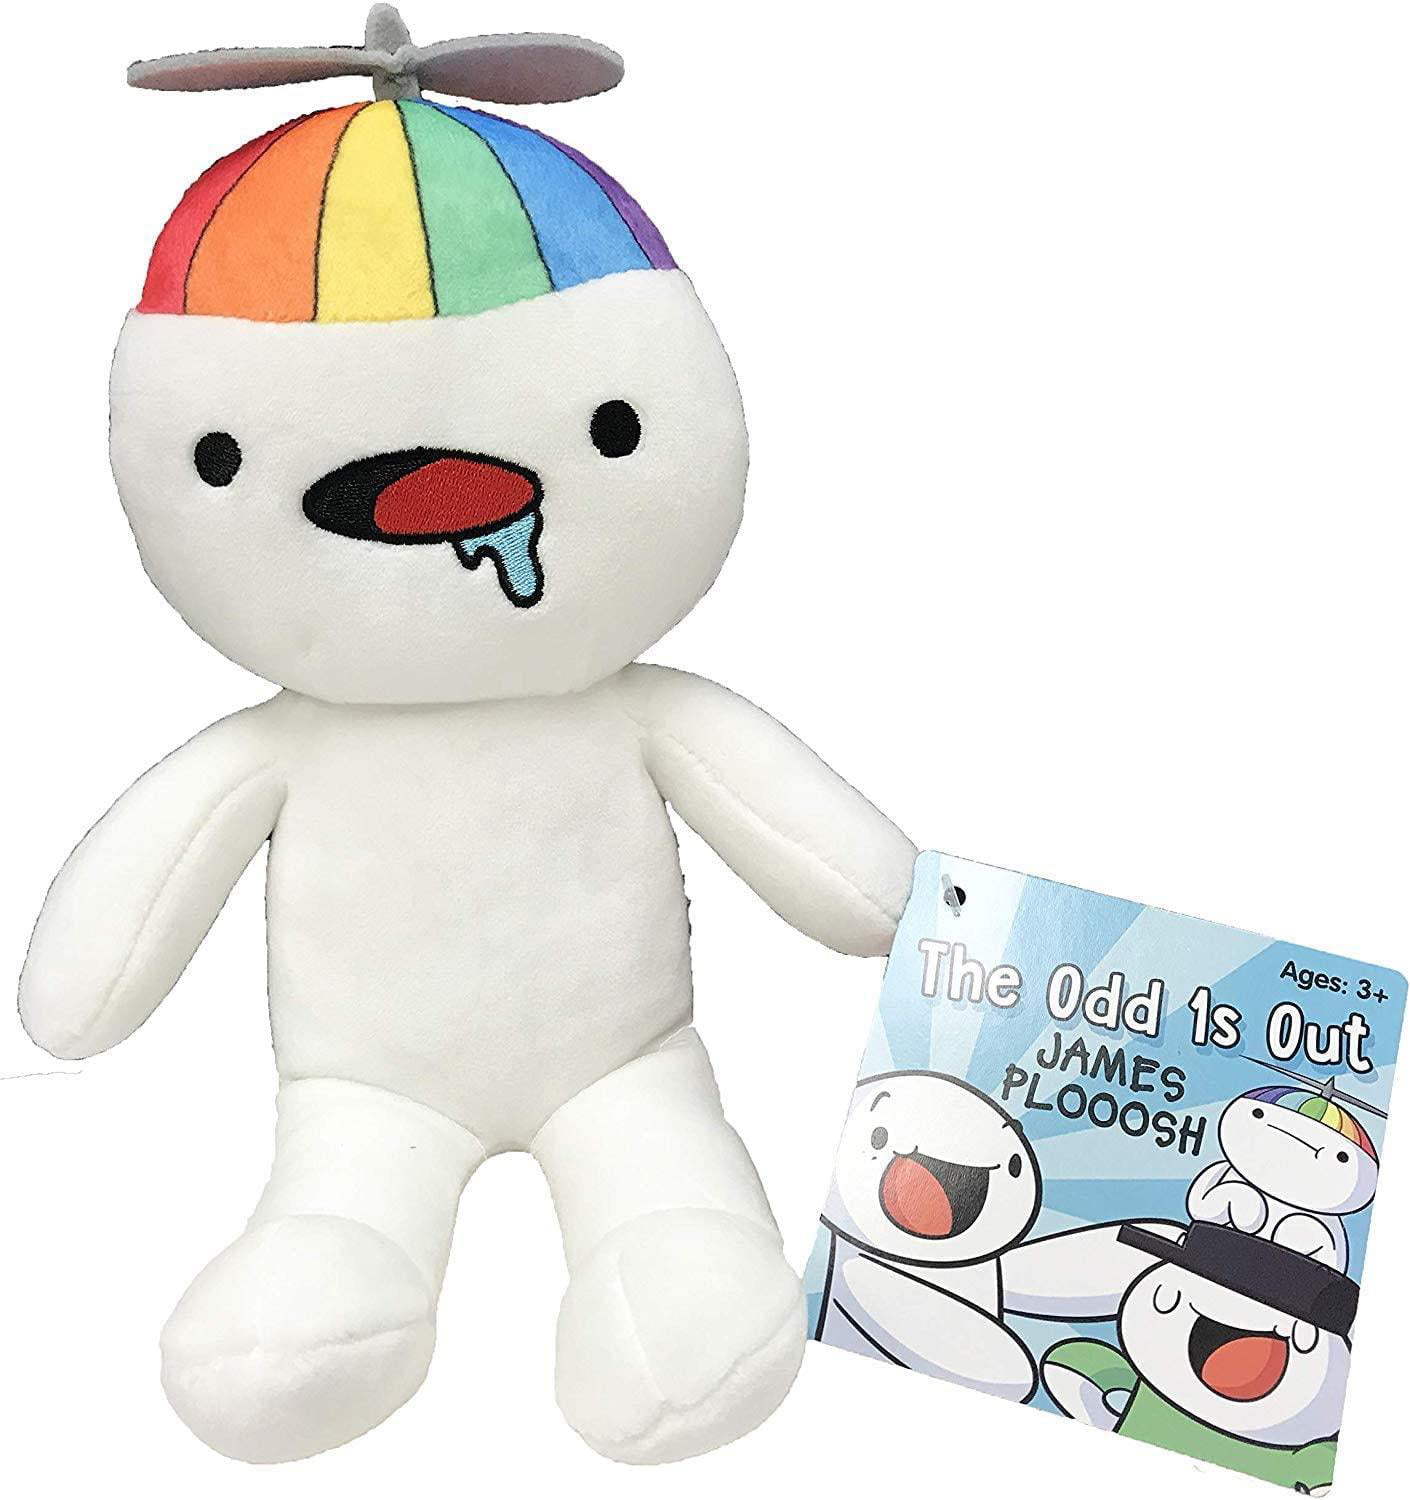 1x James The Odd 1's out Ones Baby Plooosh 8" Official Plush in Hand for sale online